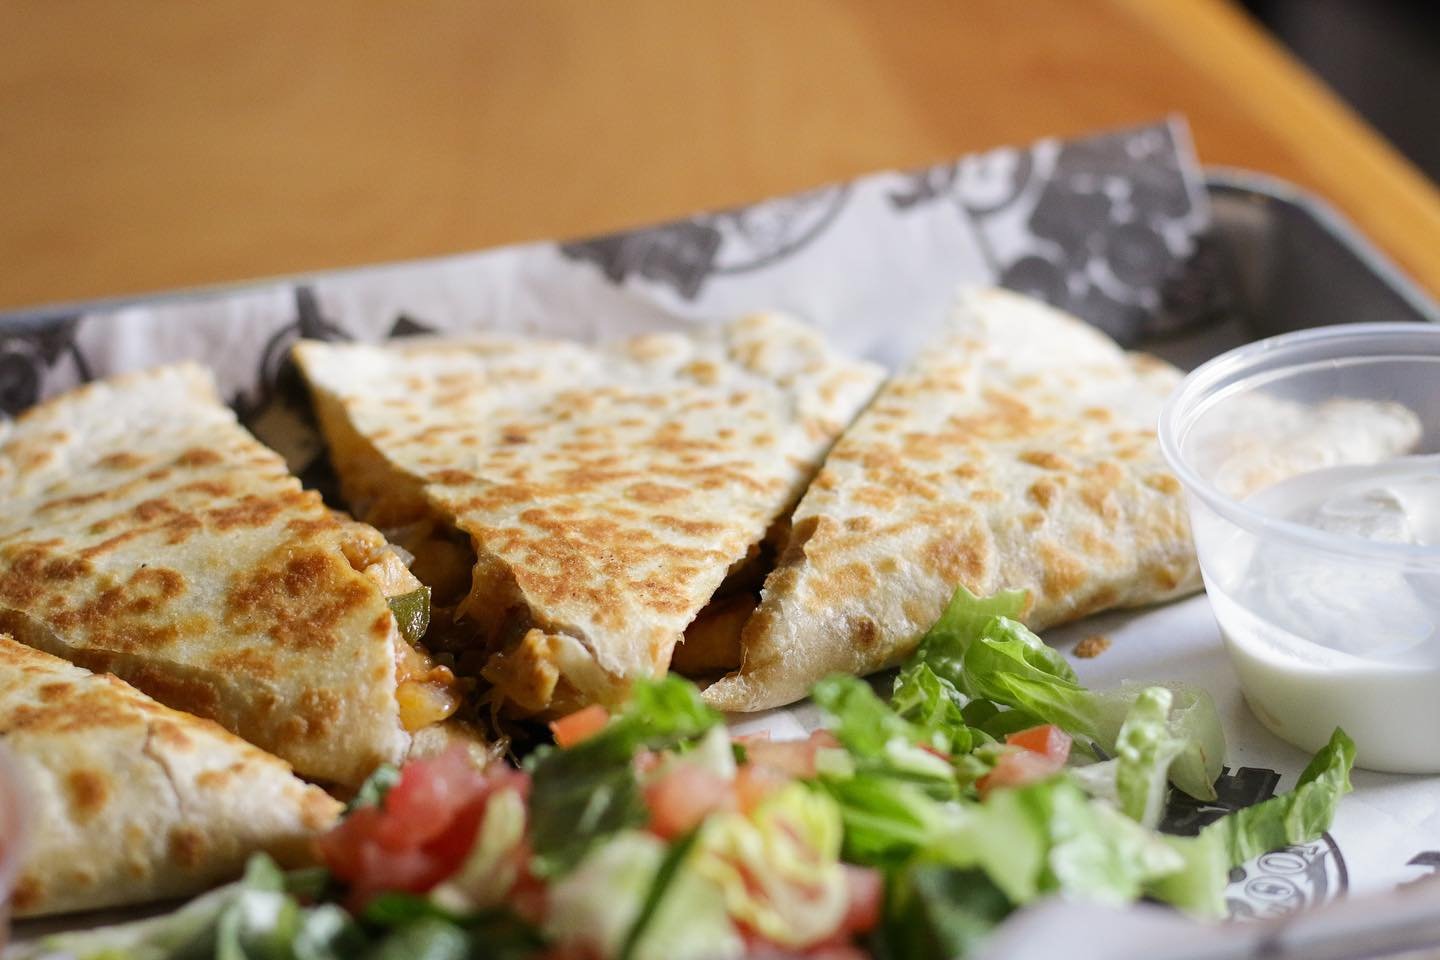 Satisfy your cravings with a refreshing drink and our mouthwatering quesadillas at Dawg House!